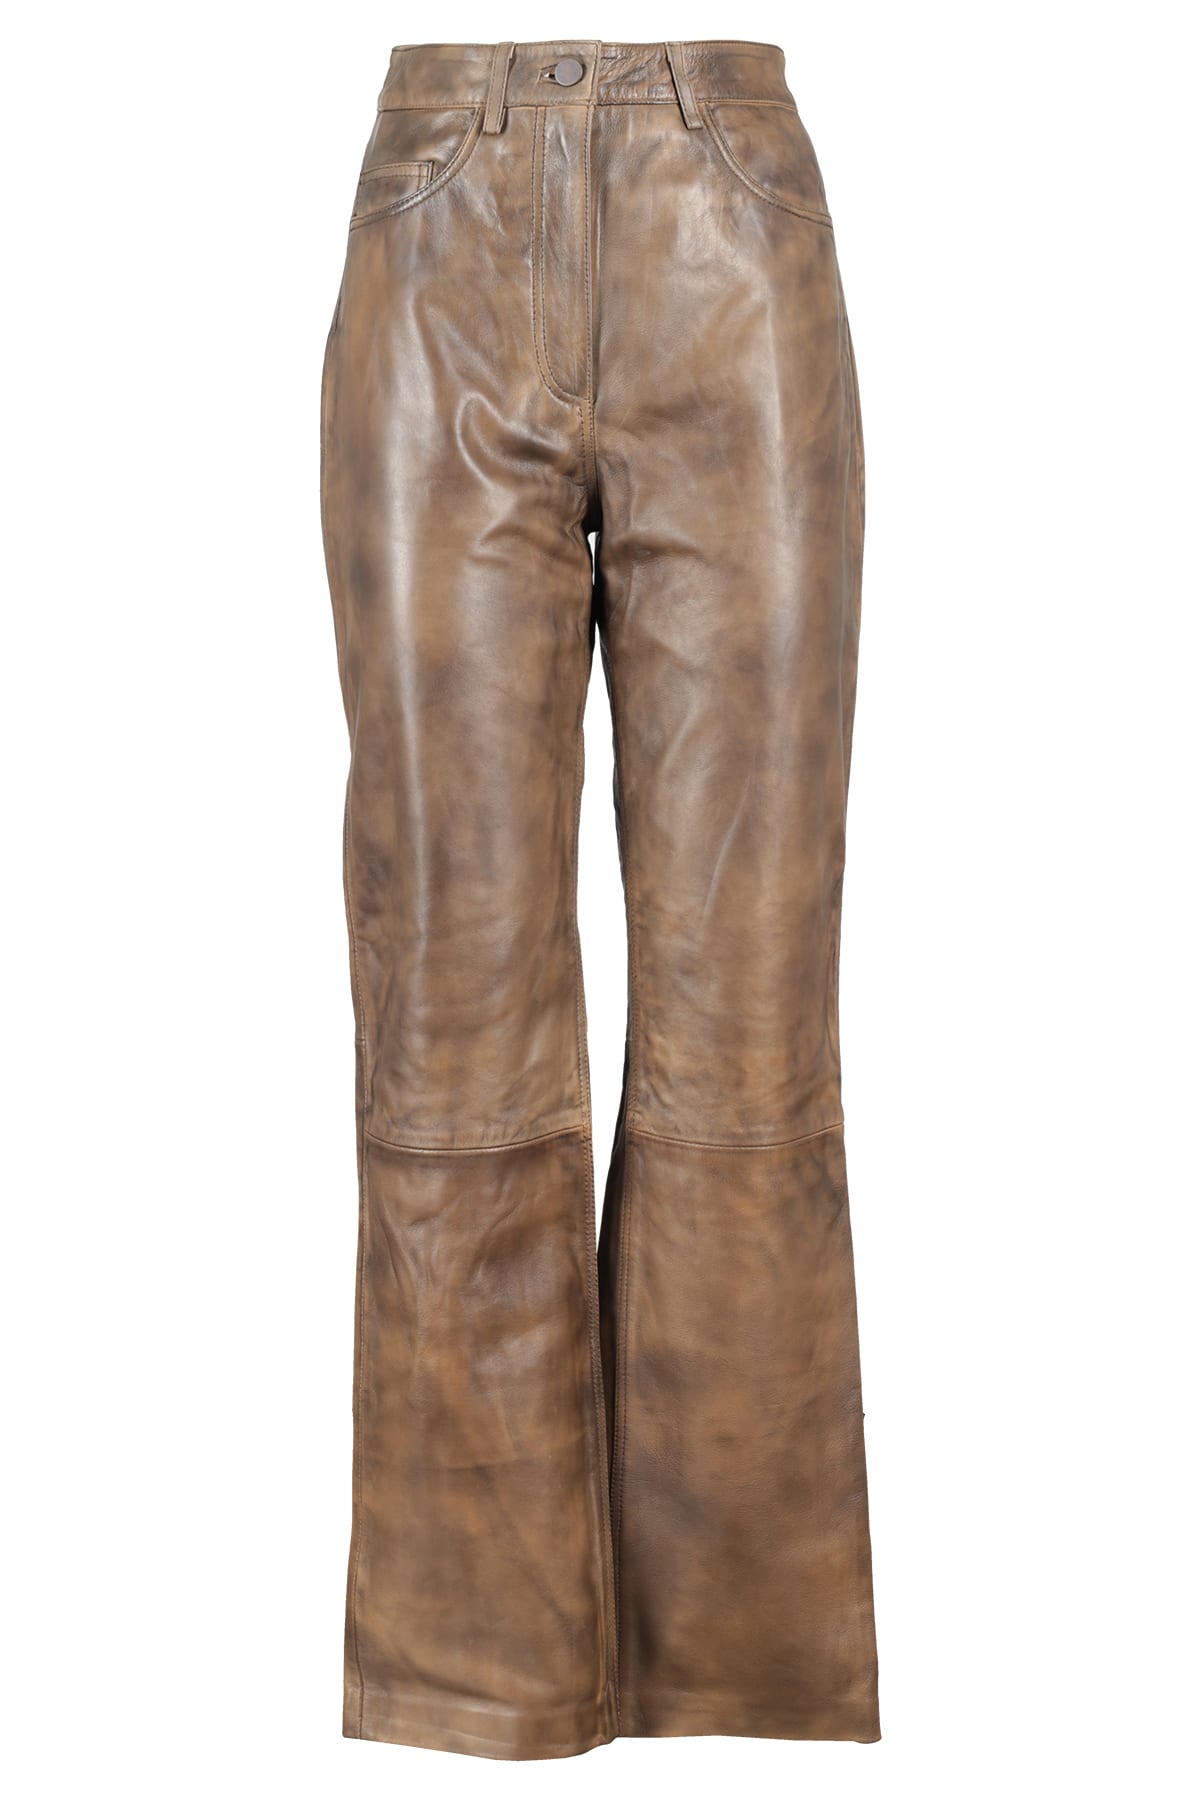 REMAIN BIRGER CHRISTENSEN LEATHER trousers